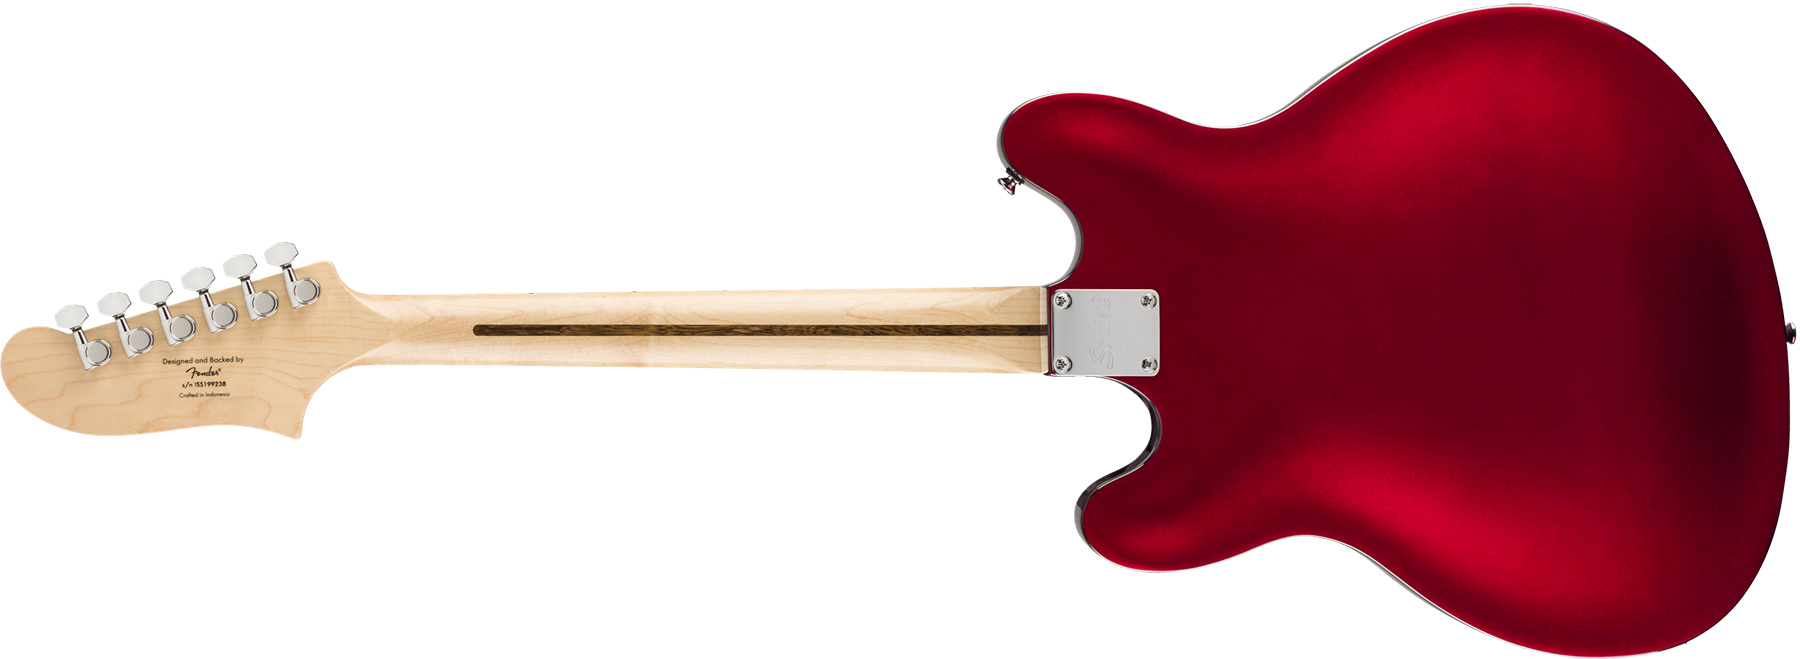 Squier Starcaster Affinity 2019 Hh Ht Mn - Candy Apple Red - Guitarra eléctrica semi caja - Variation 1